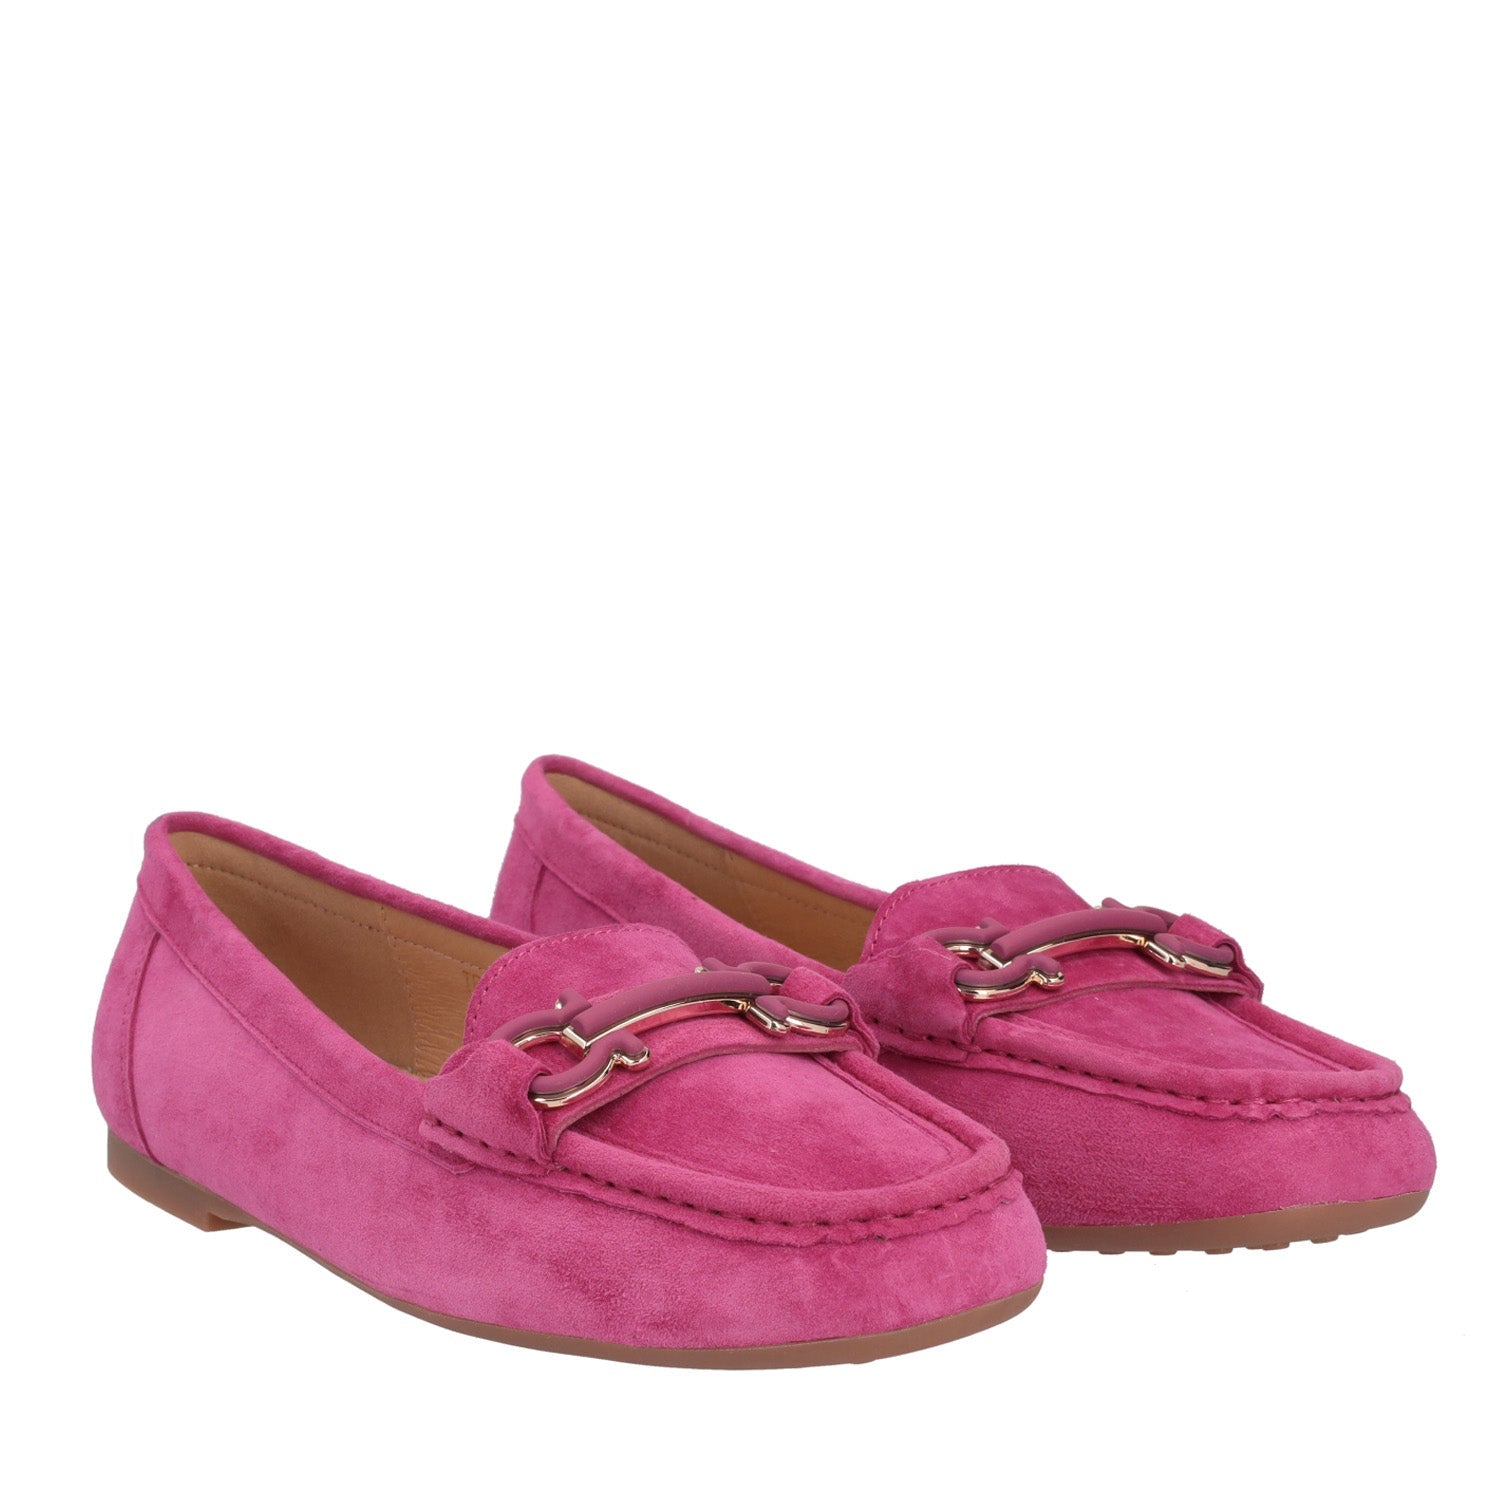 FUCHSIA CARMEN LEATHER MOCCASIN WITH CLAMP